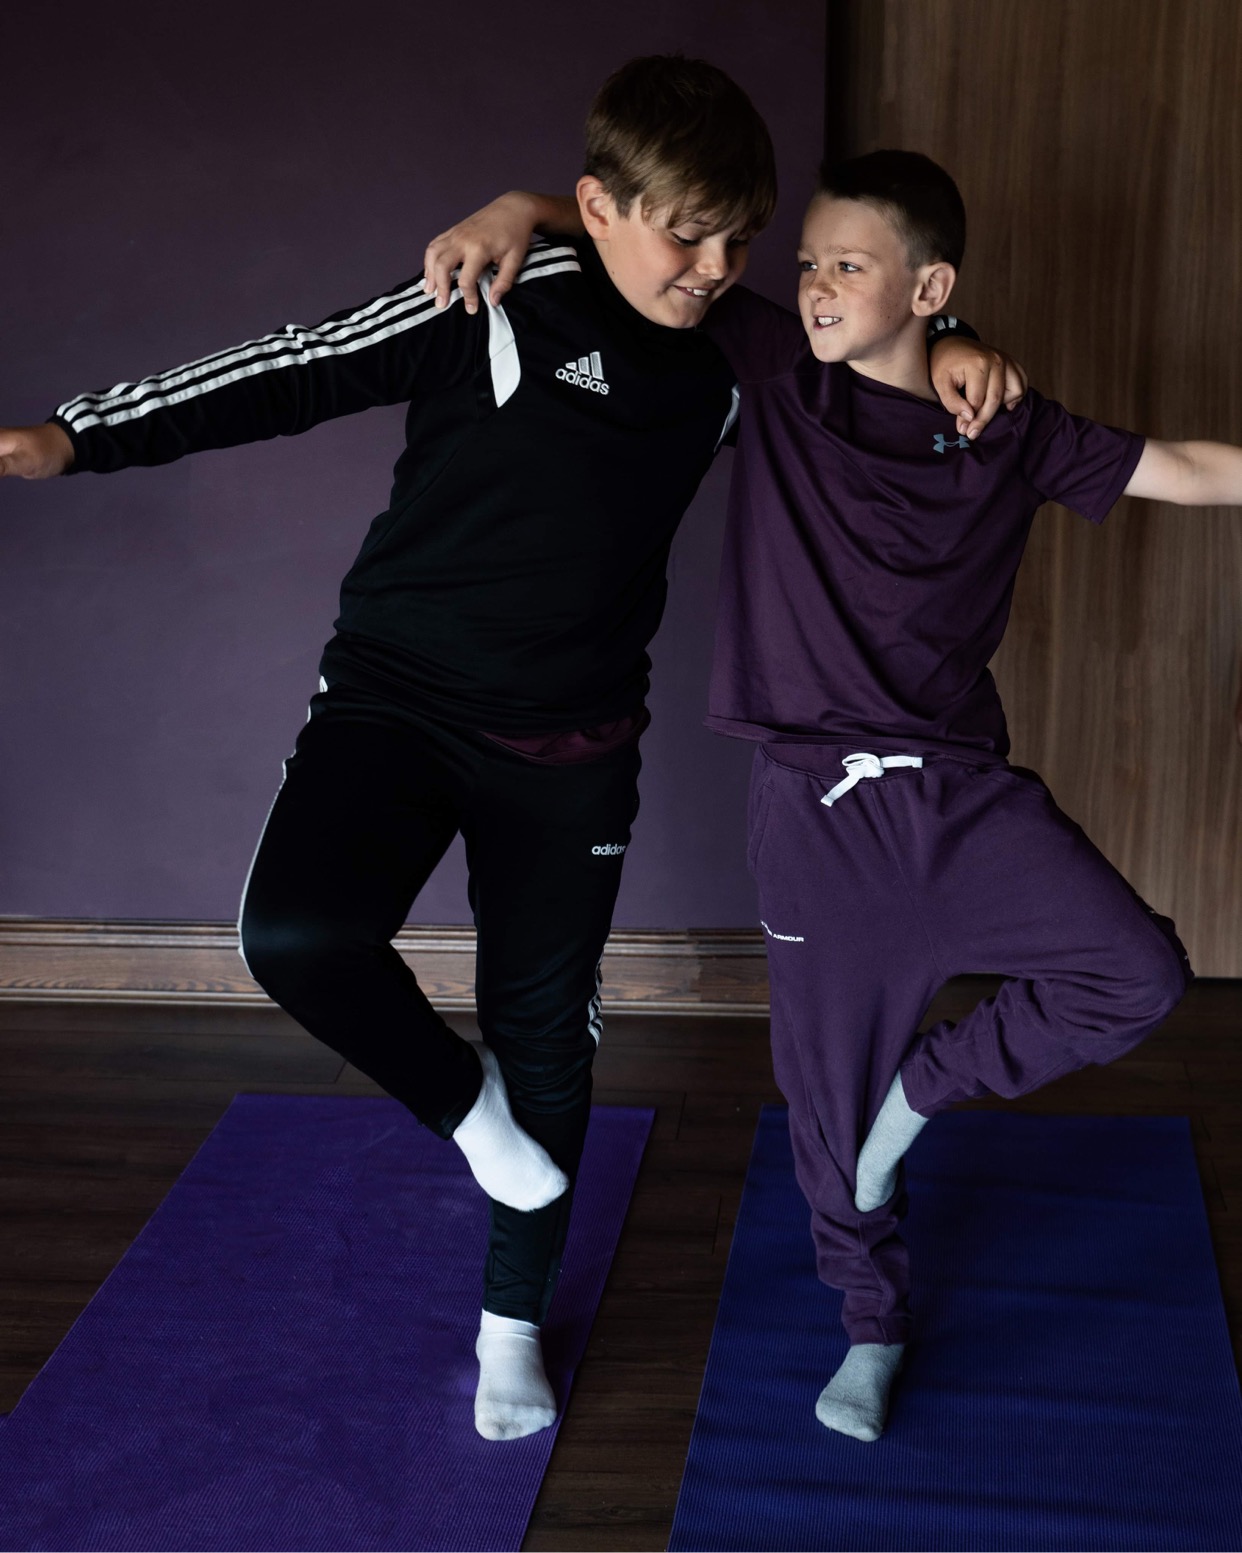 two boys balancing against each other on one leg to teach support and trust